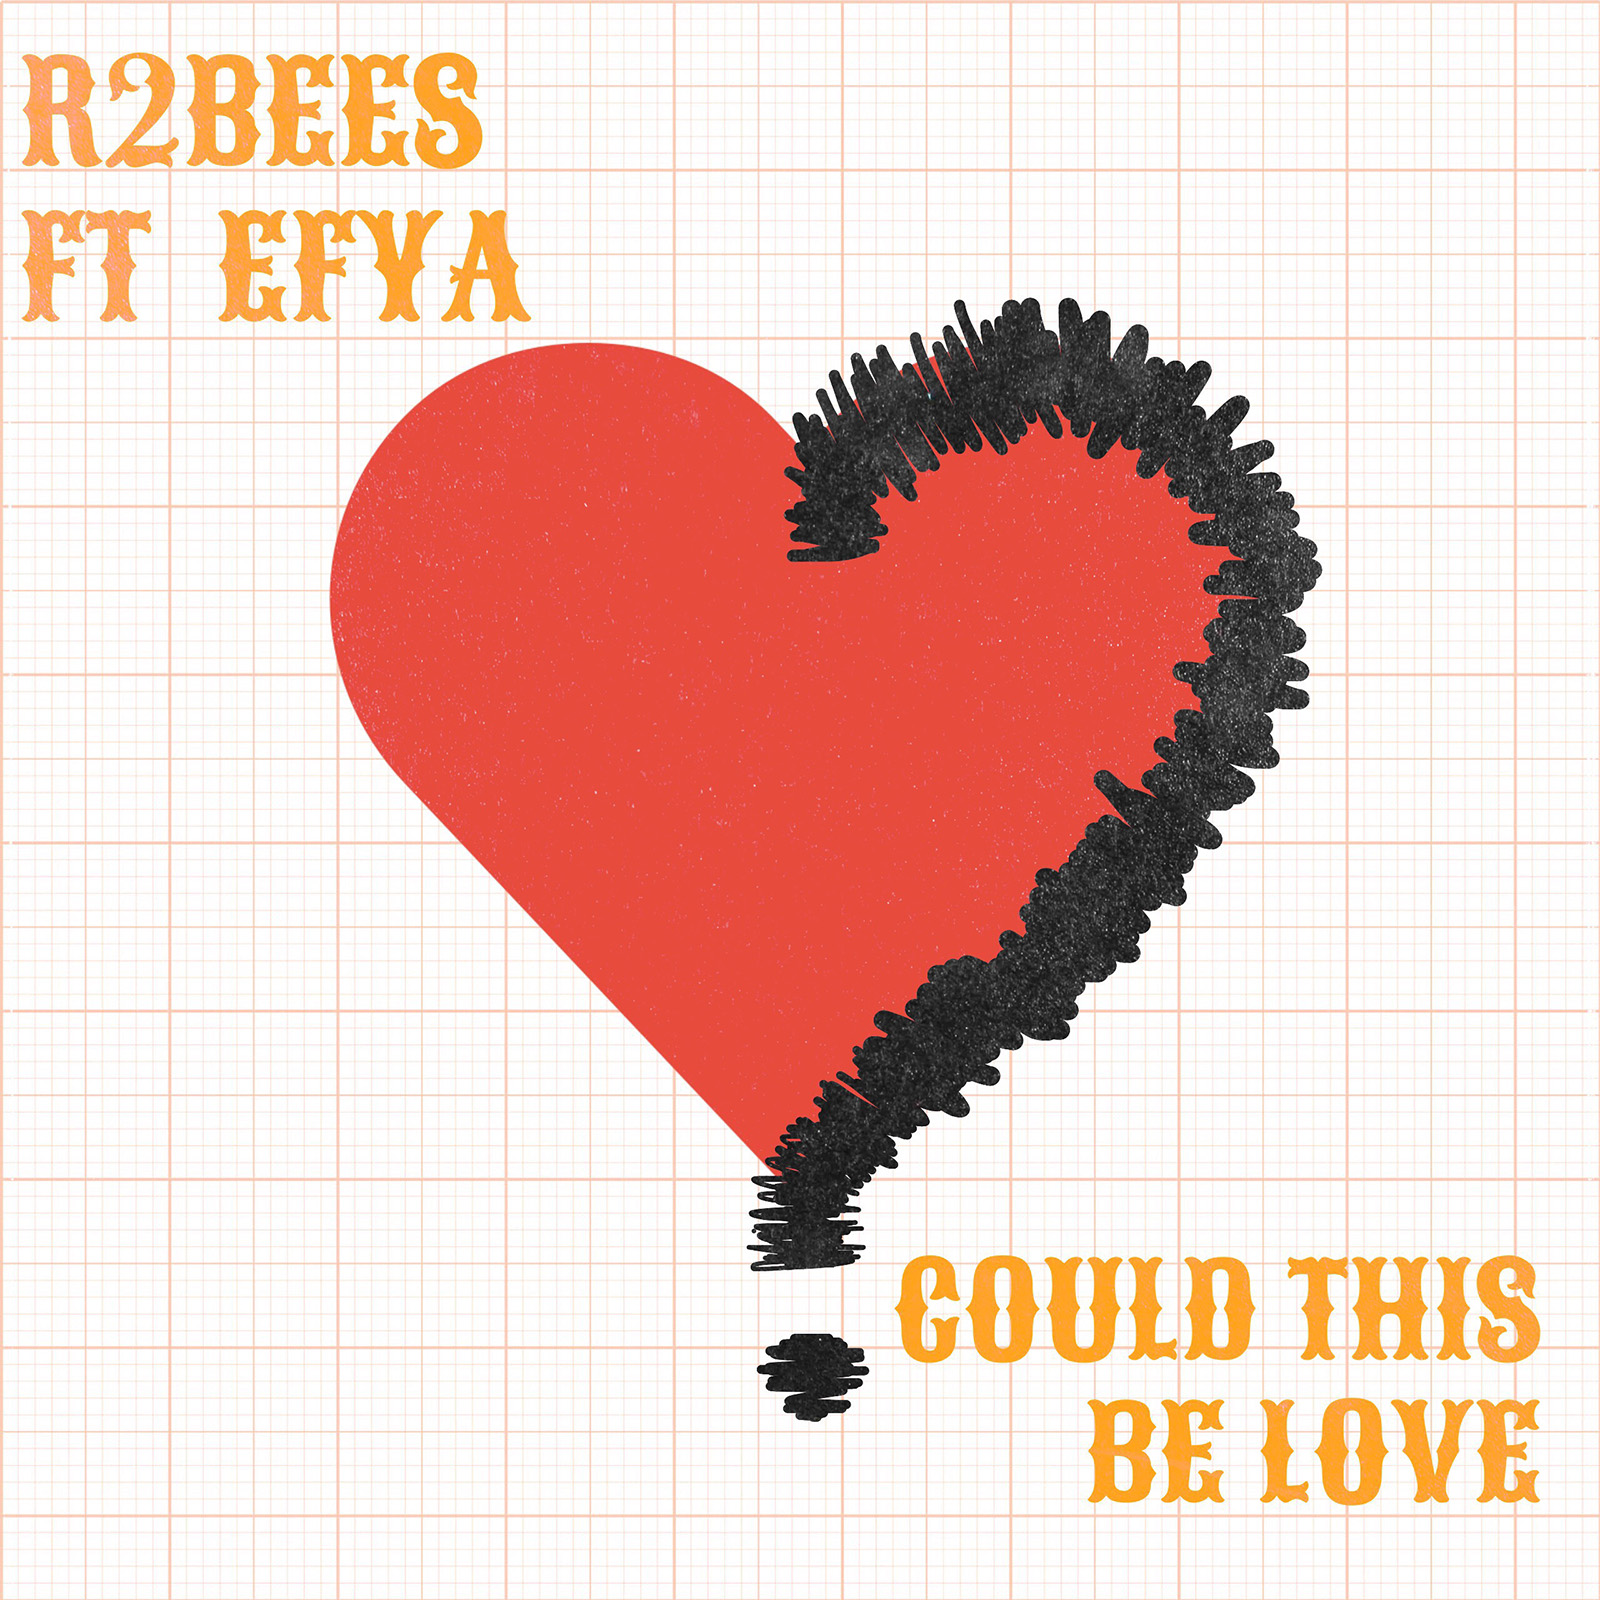 Could This Be Love by R2bees feat. Efya